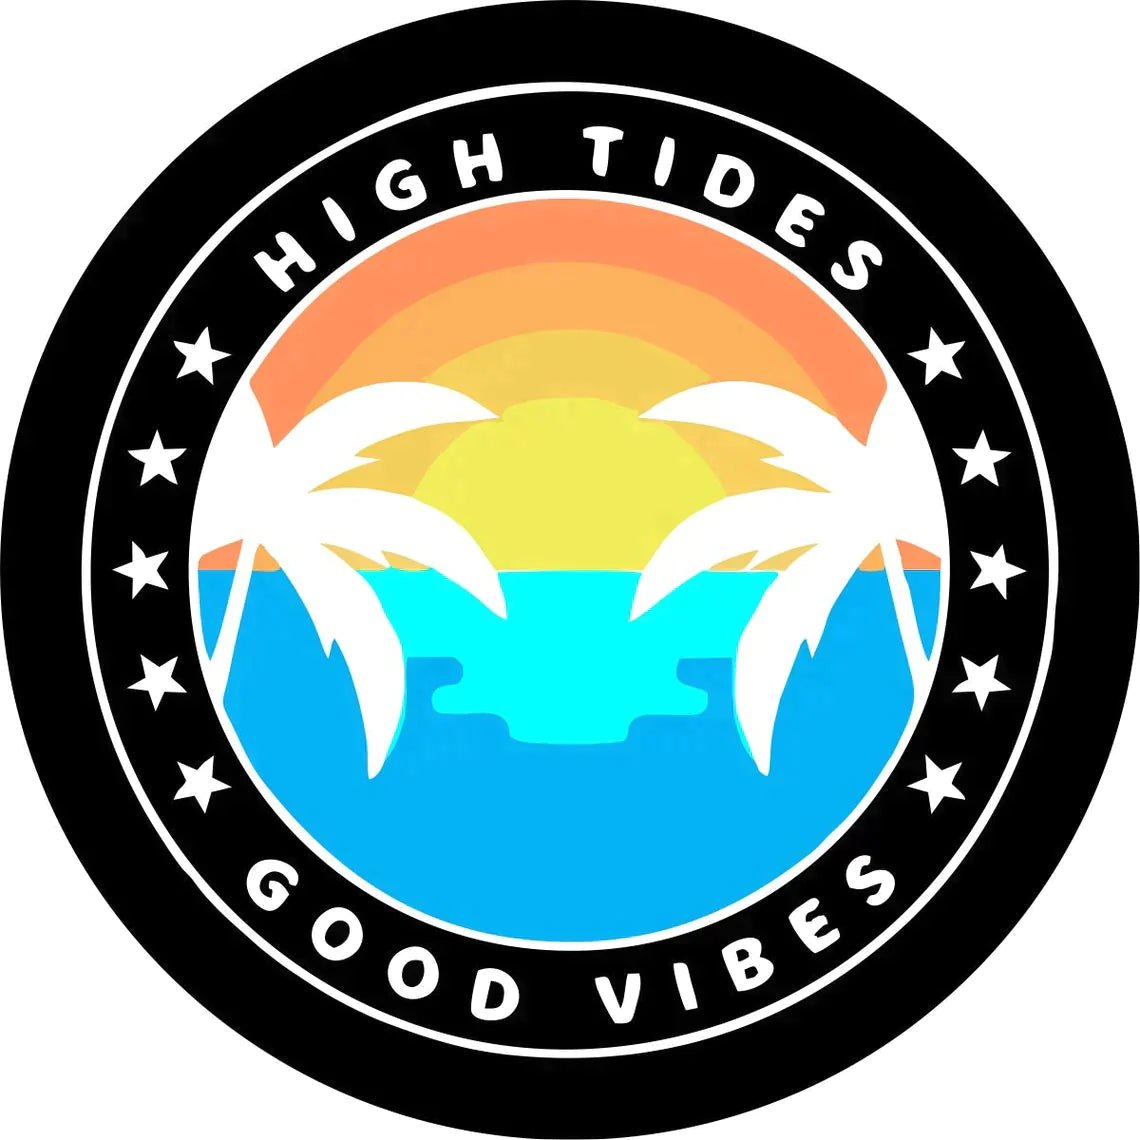 High Tides Good Vibes Spare Tire Cover - Goats Trail